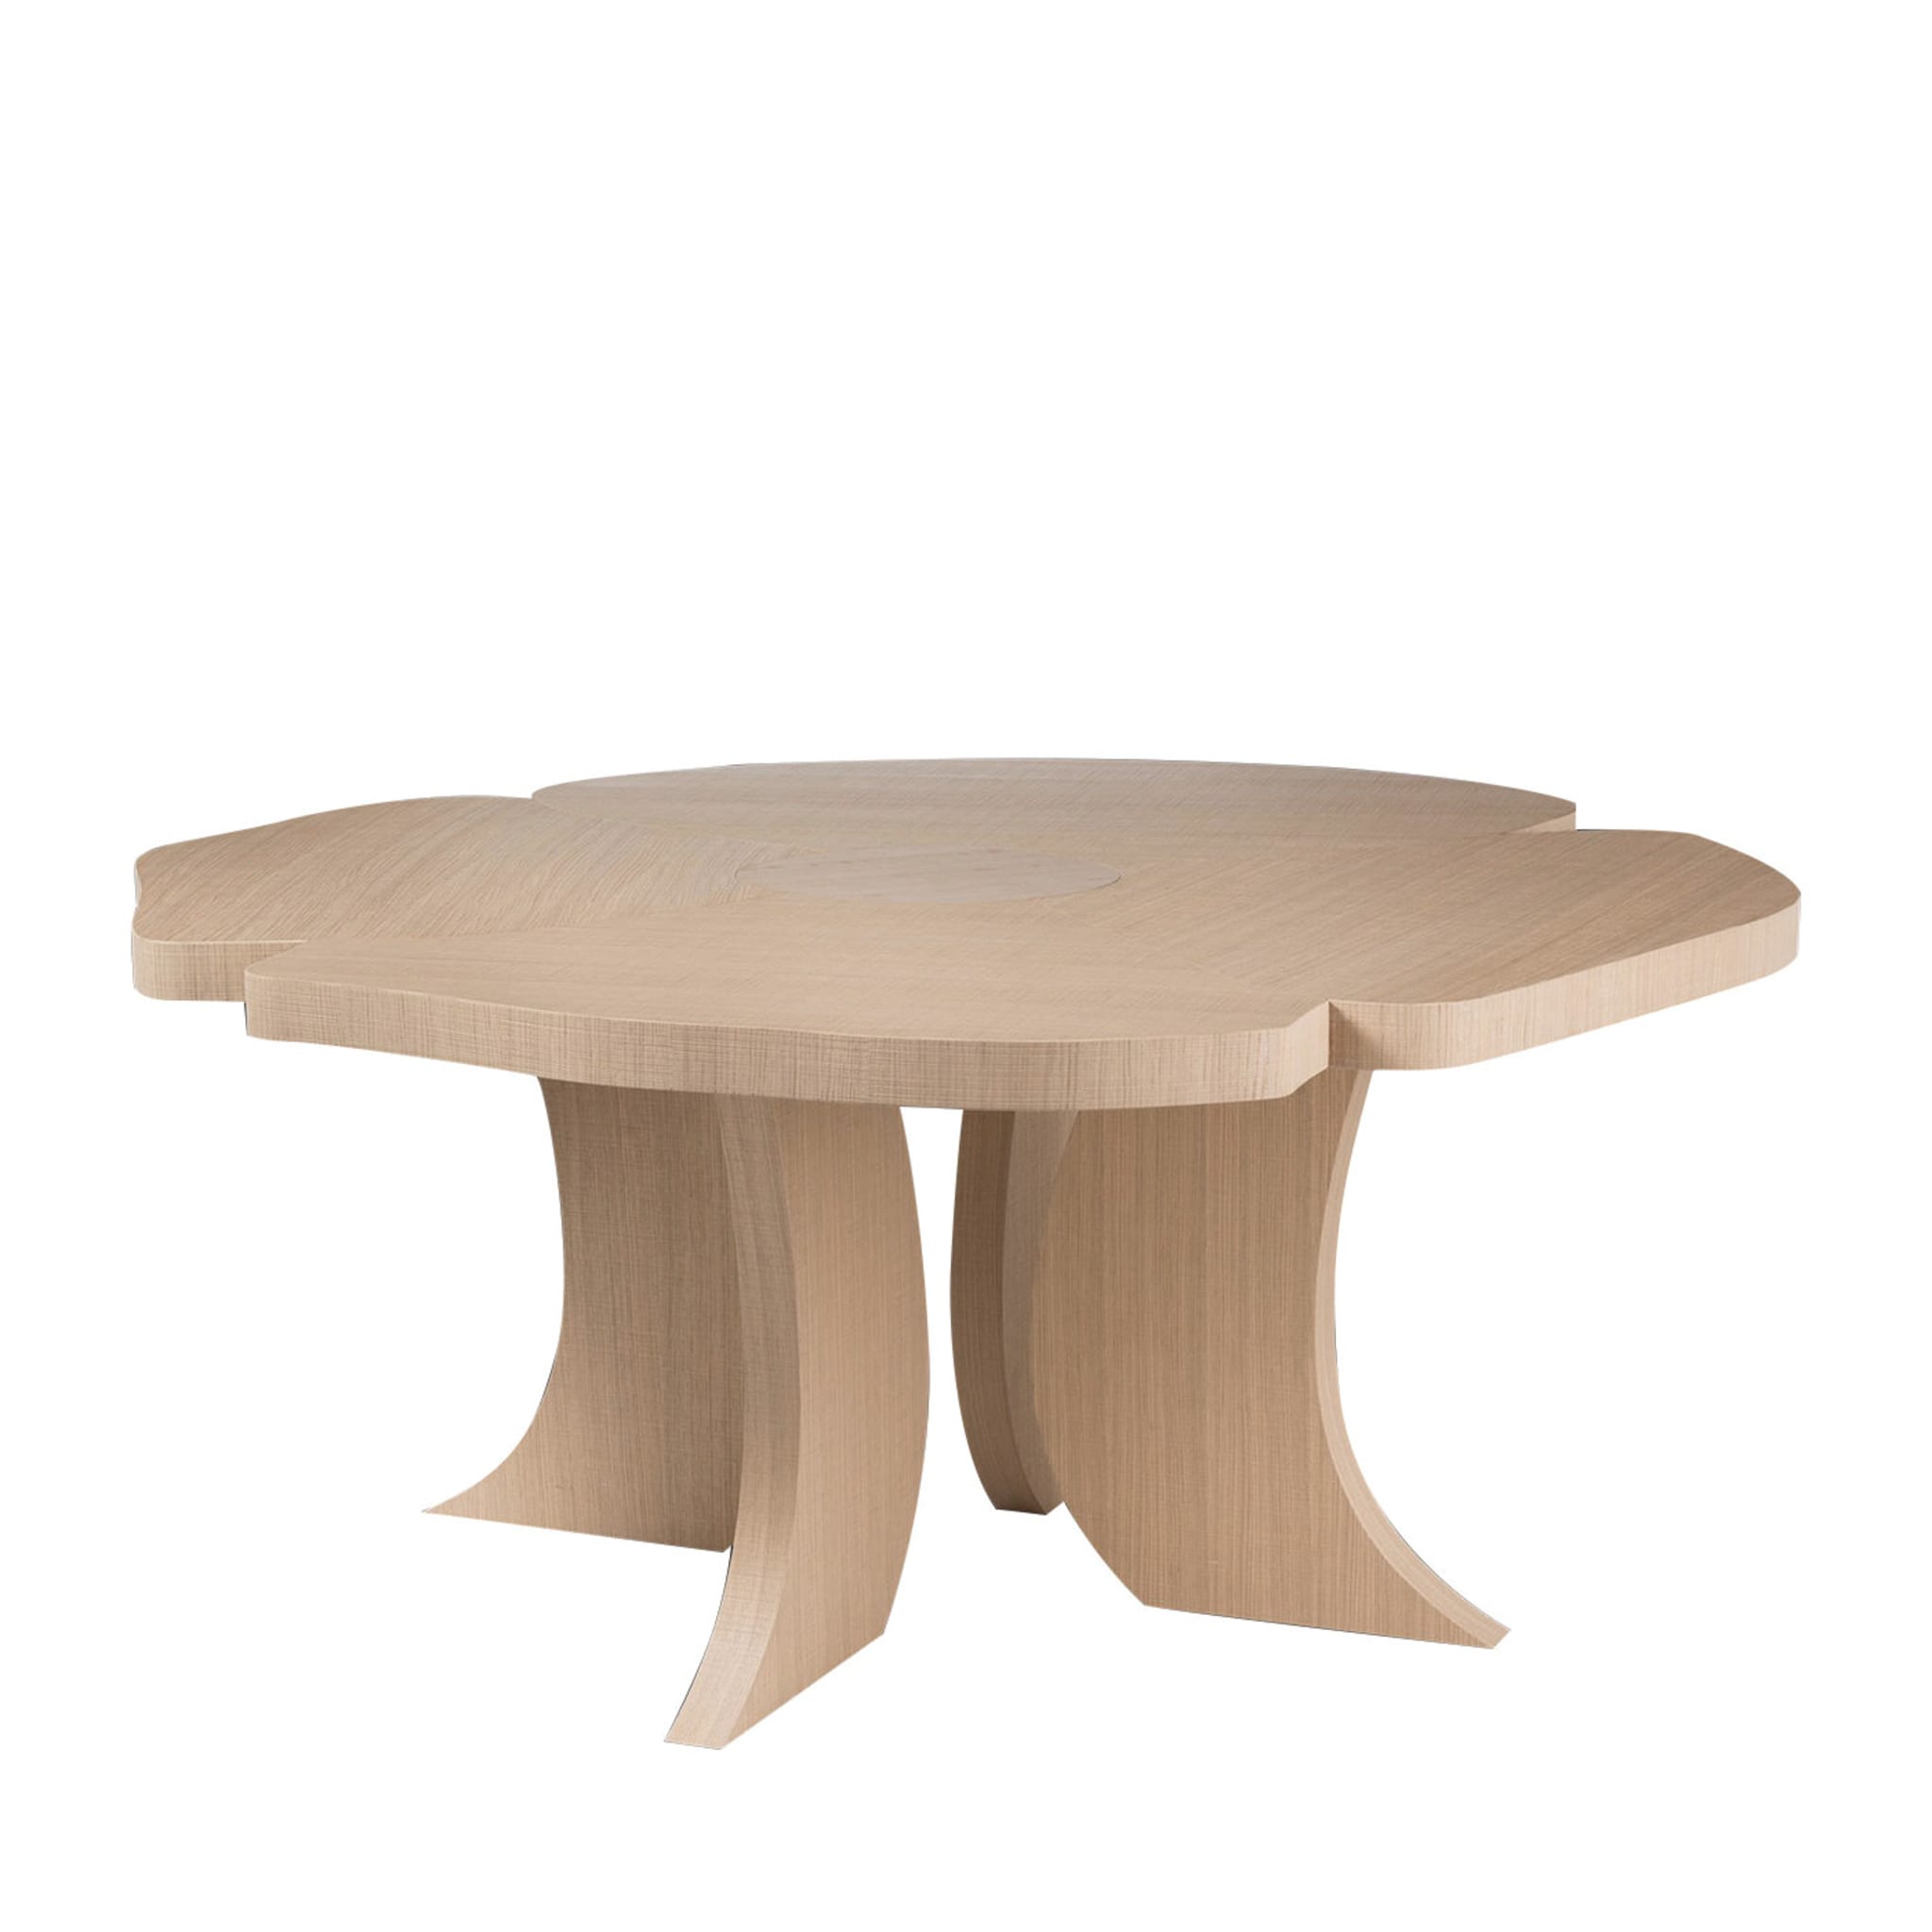 Andy Natural Dining Table - Main view